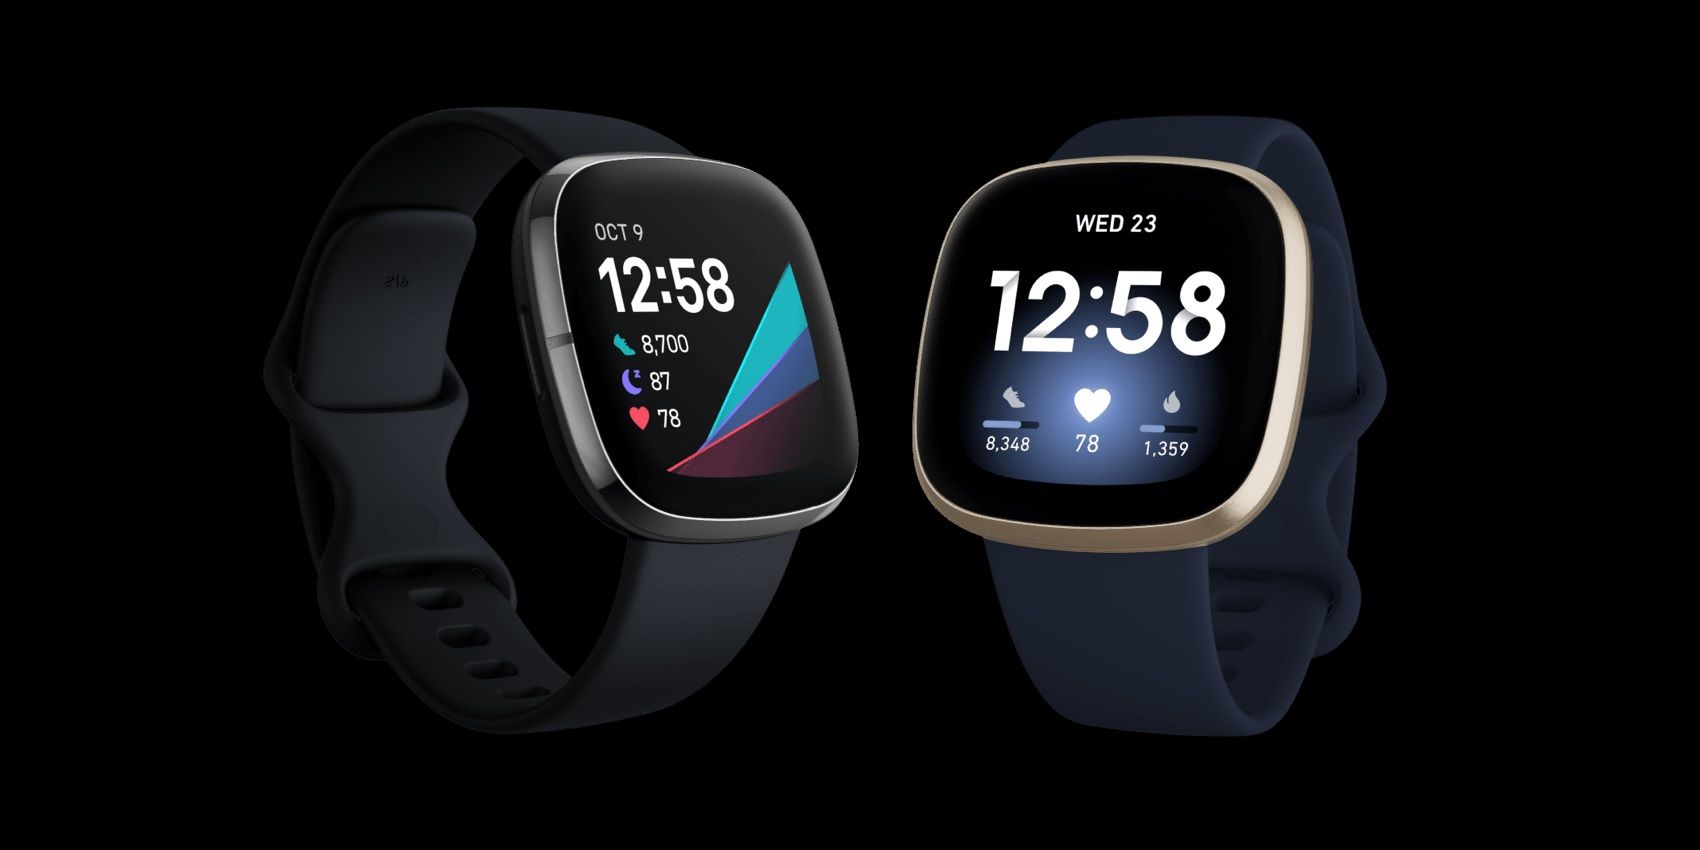 The Fitbit Sense and Versa 3 receive new features and refinements with